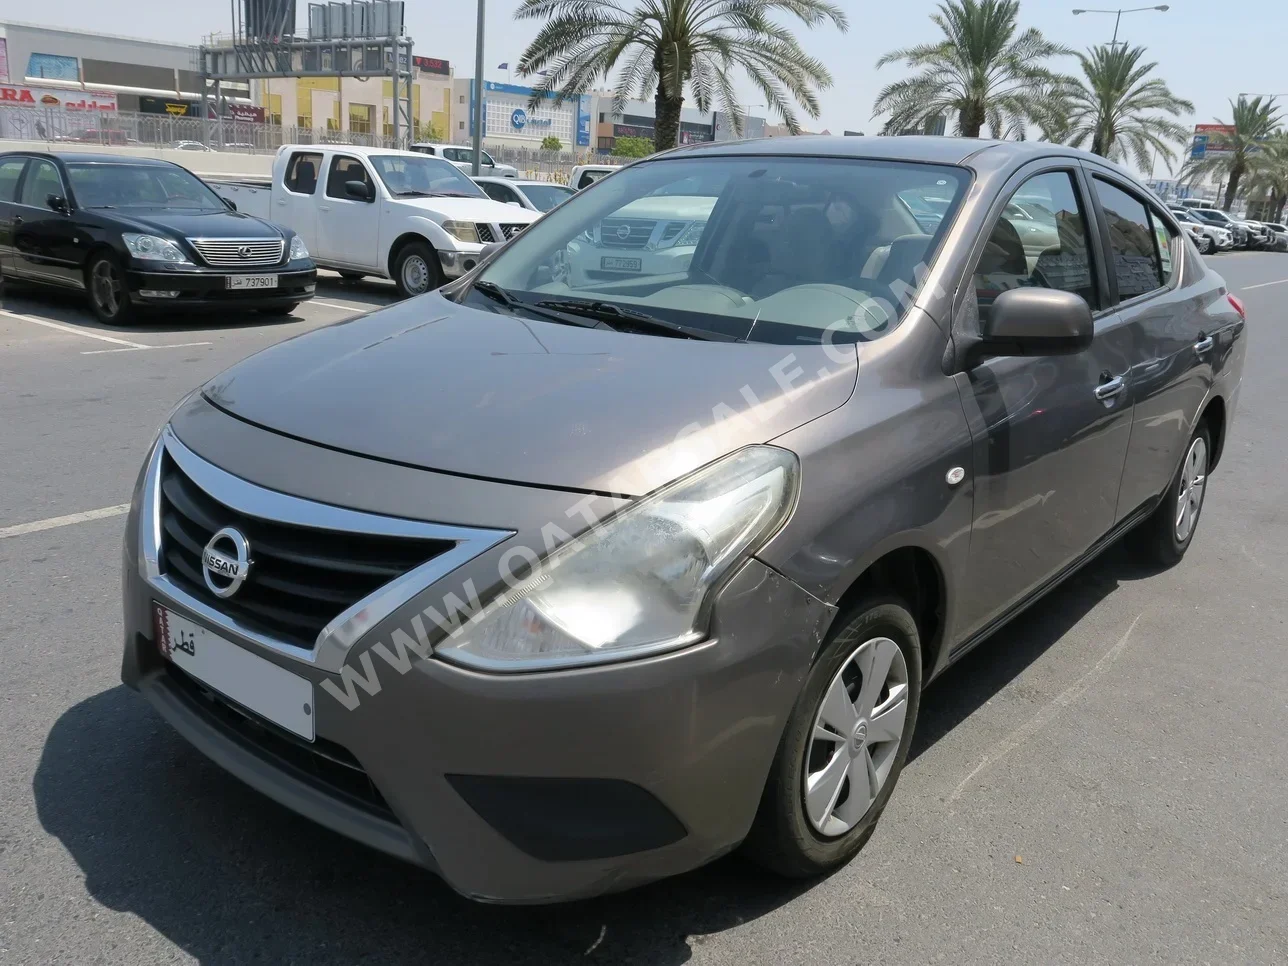 Nissan  Sunny  2019  Automatic  114,000 Km  4 Cylinder  Front Wheel Drive (FWD)  Sedan  Gray